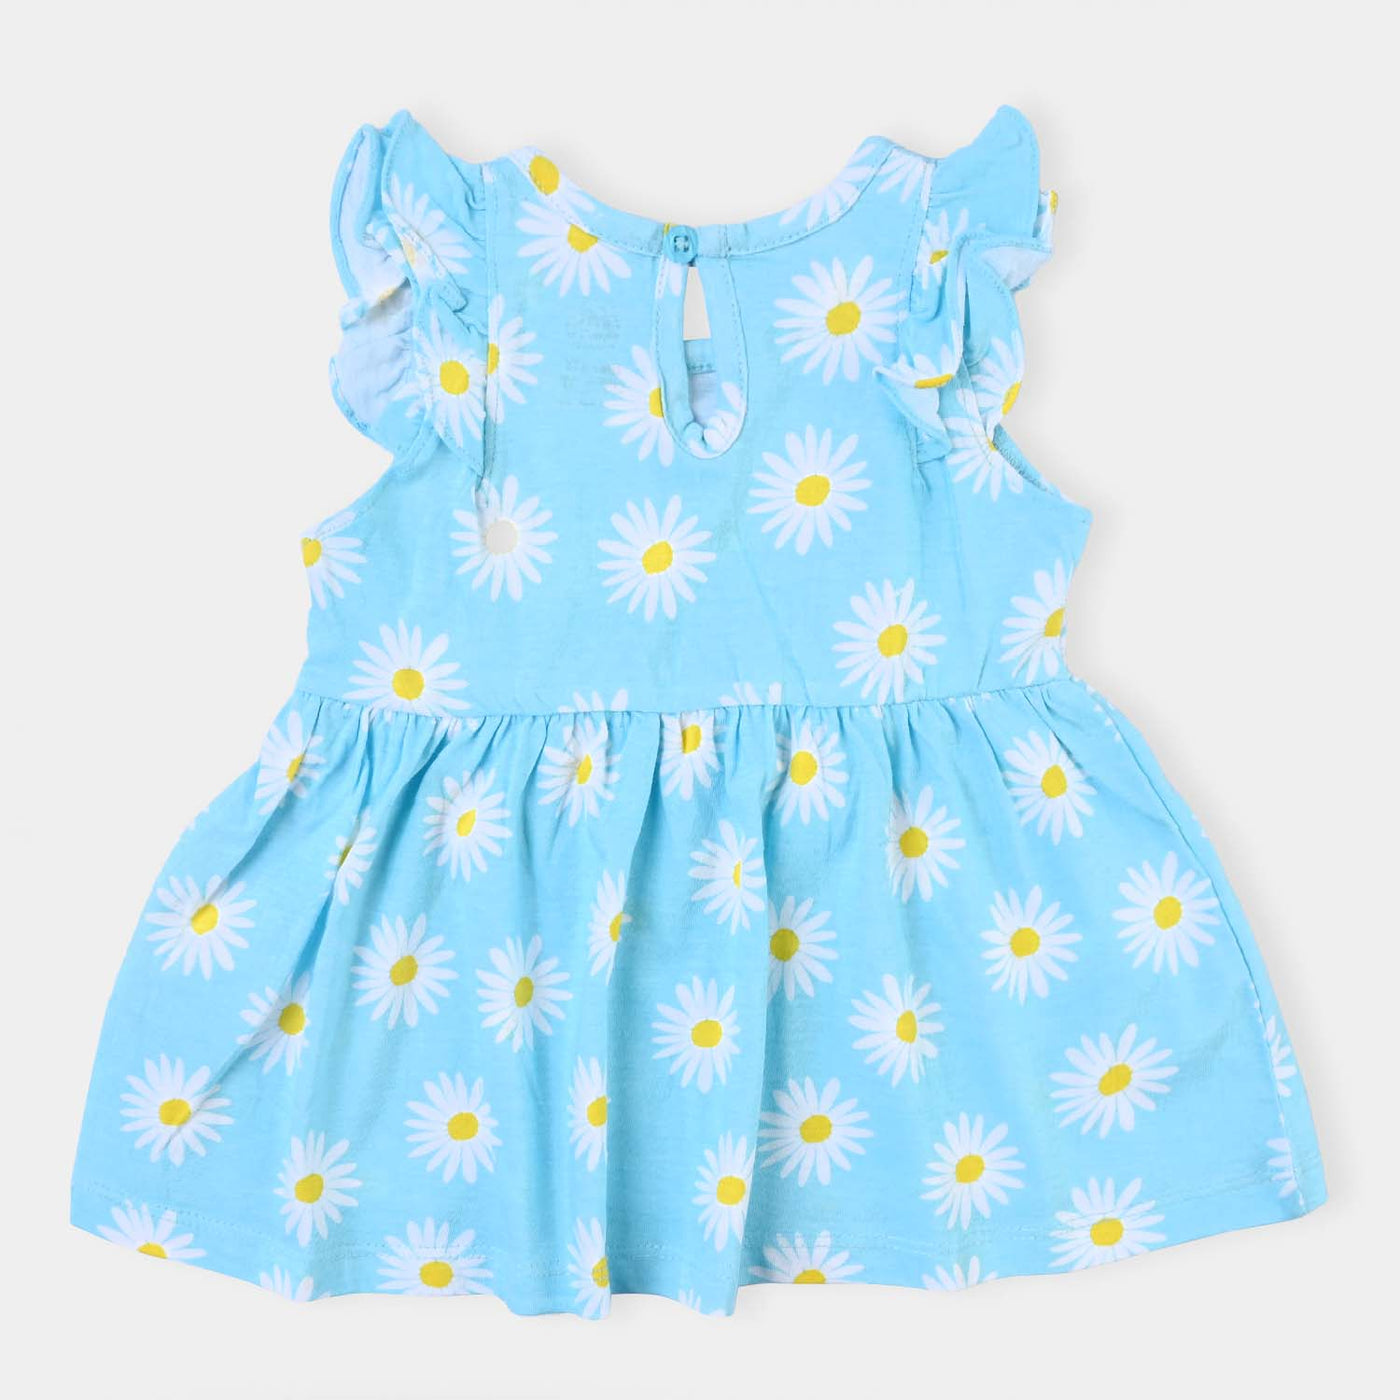 Infant Girls Cotton Terry Knitted Frock Flowers-Star/L/B